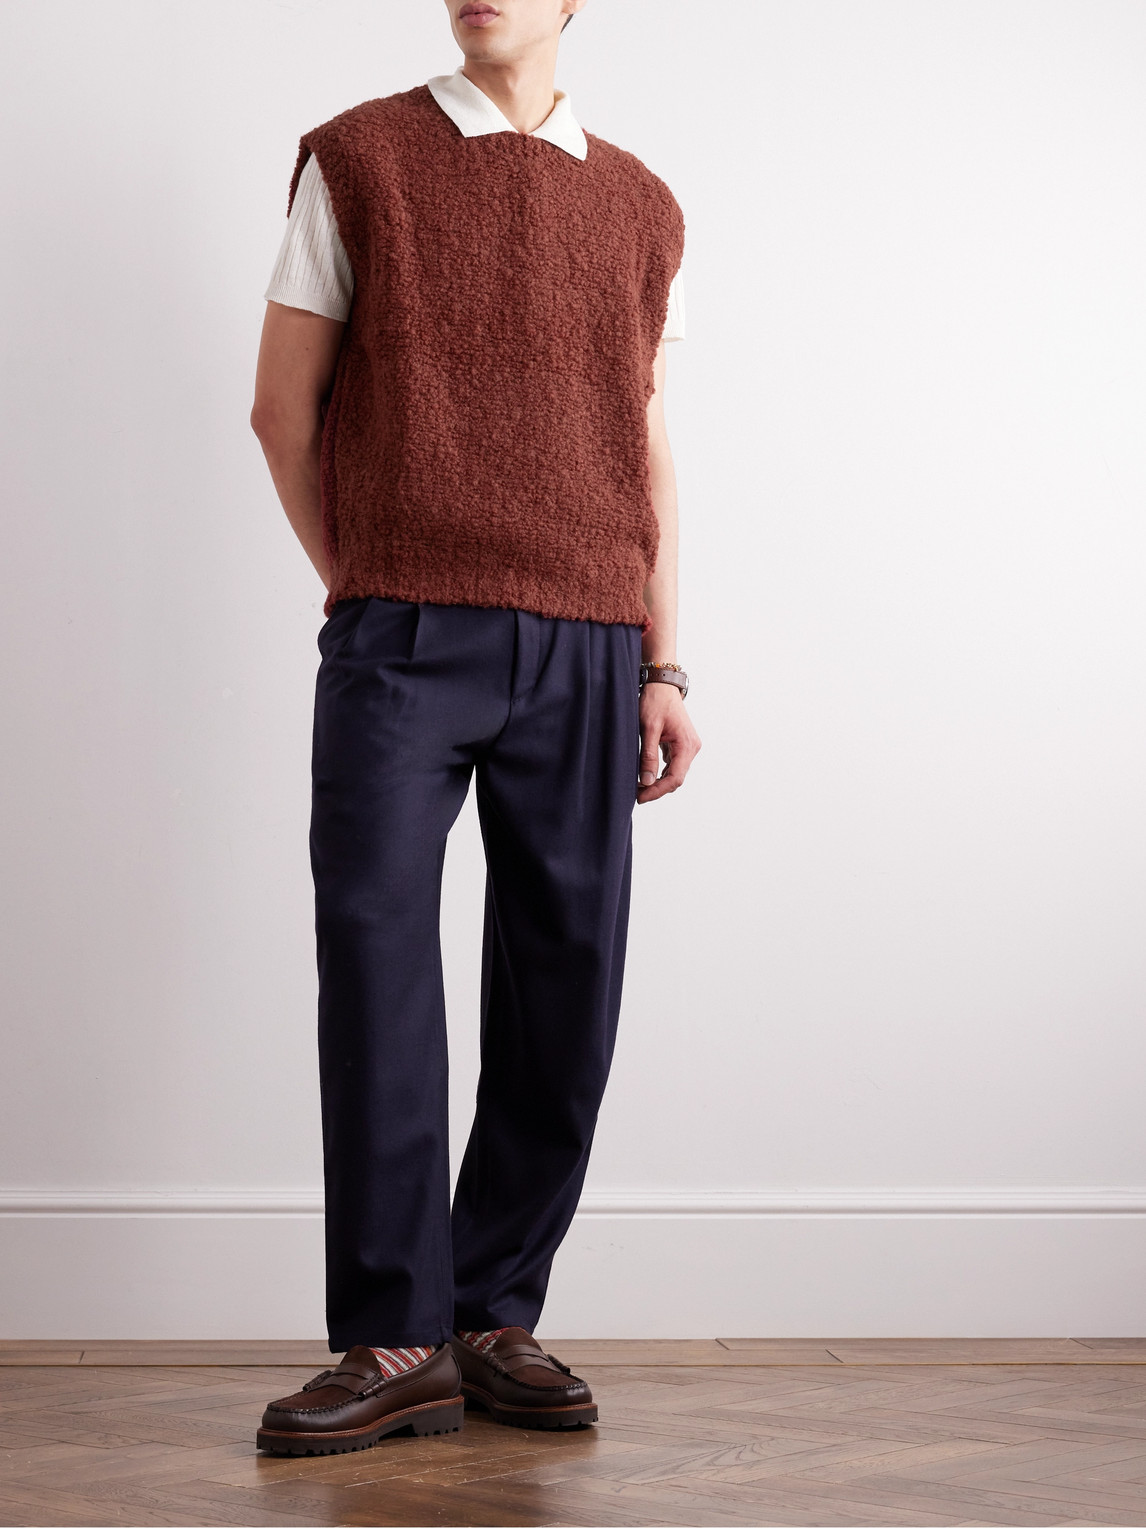 Shop A Kind Of Guise Lundur Wool-blend Bouclé Gilet In Red